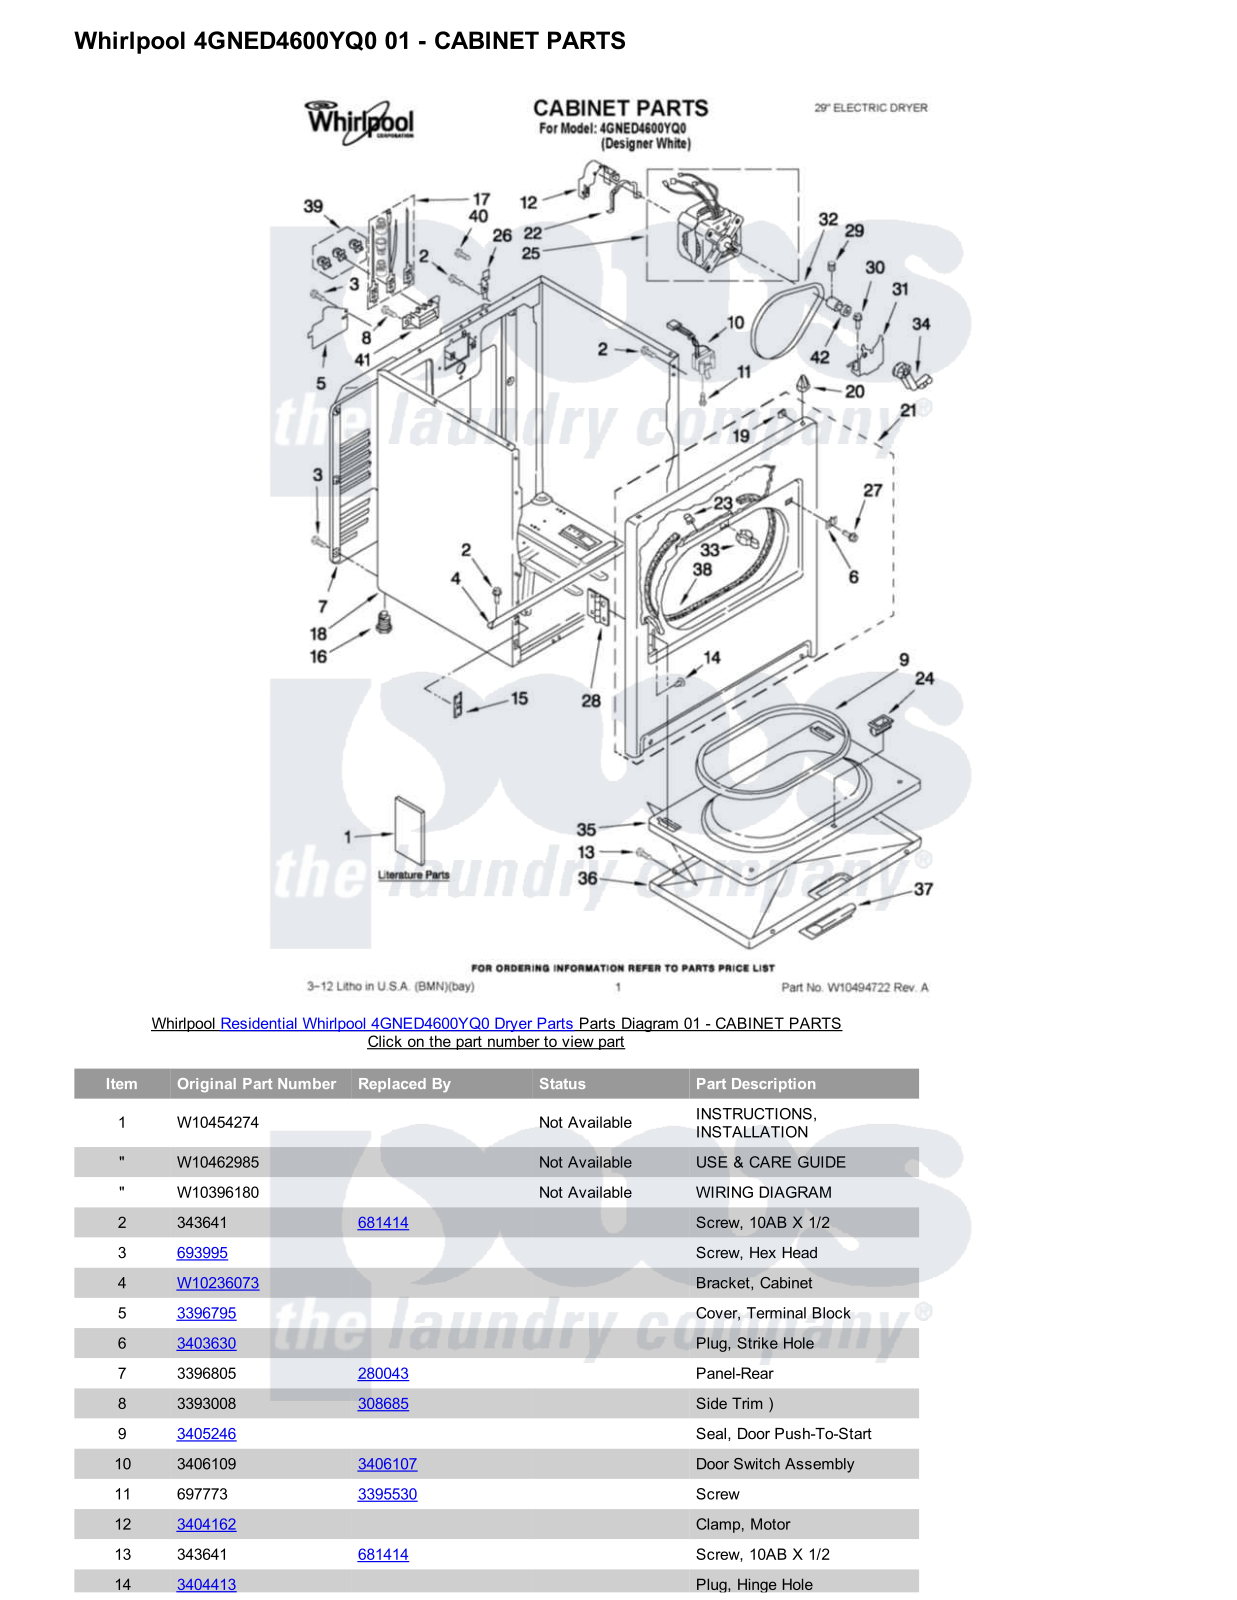 Whirlpool 4GNED4600YQ0 Parts Diagram